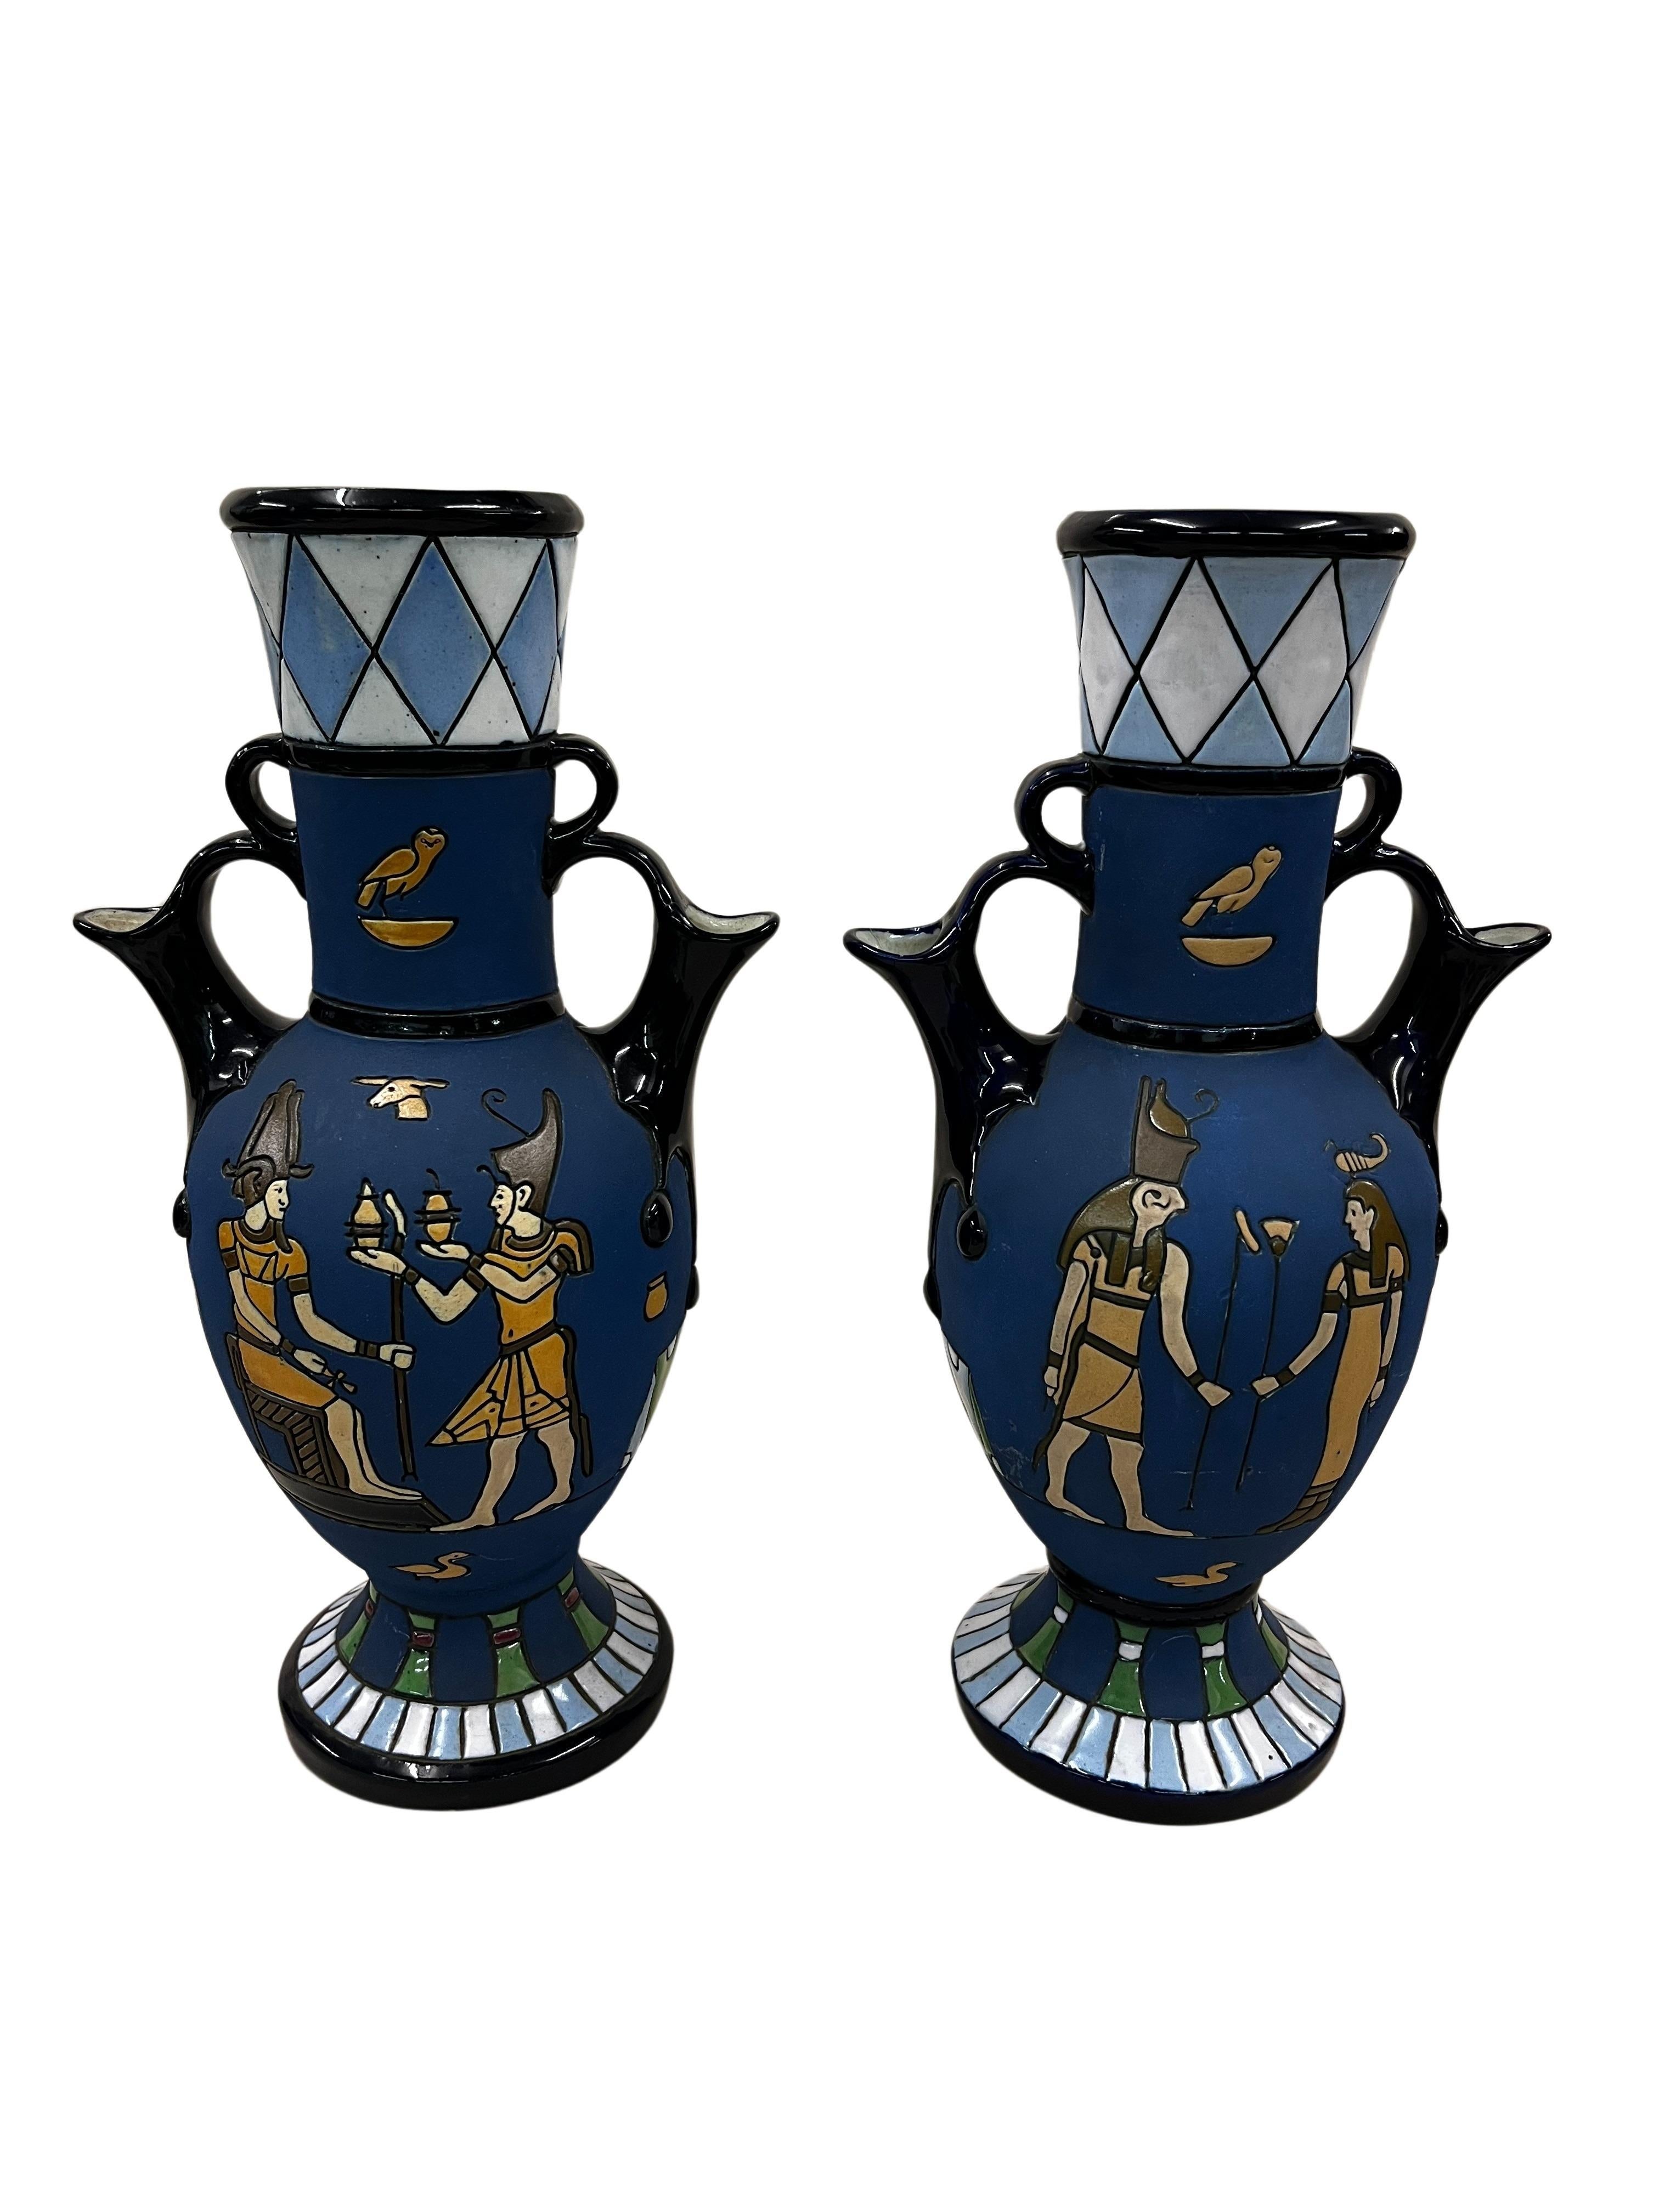 Pair of very rare vases / jugs by wellknown manufacturer Amphora, which can be used on both sides, made around 1915 in Czech Republic. 

The extraordinary pair is of the same size and decor but slightly different colors. Both have a blue - white